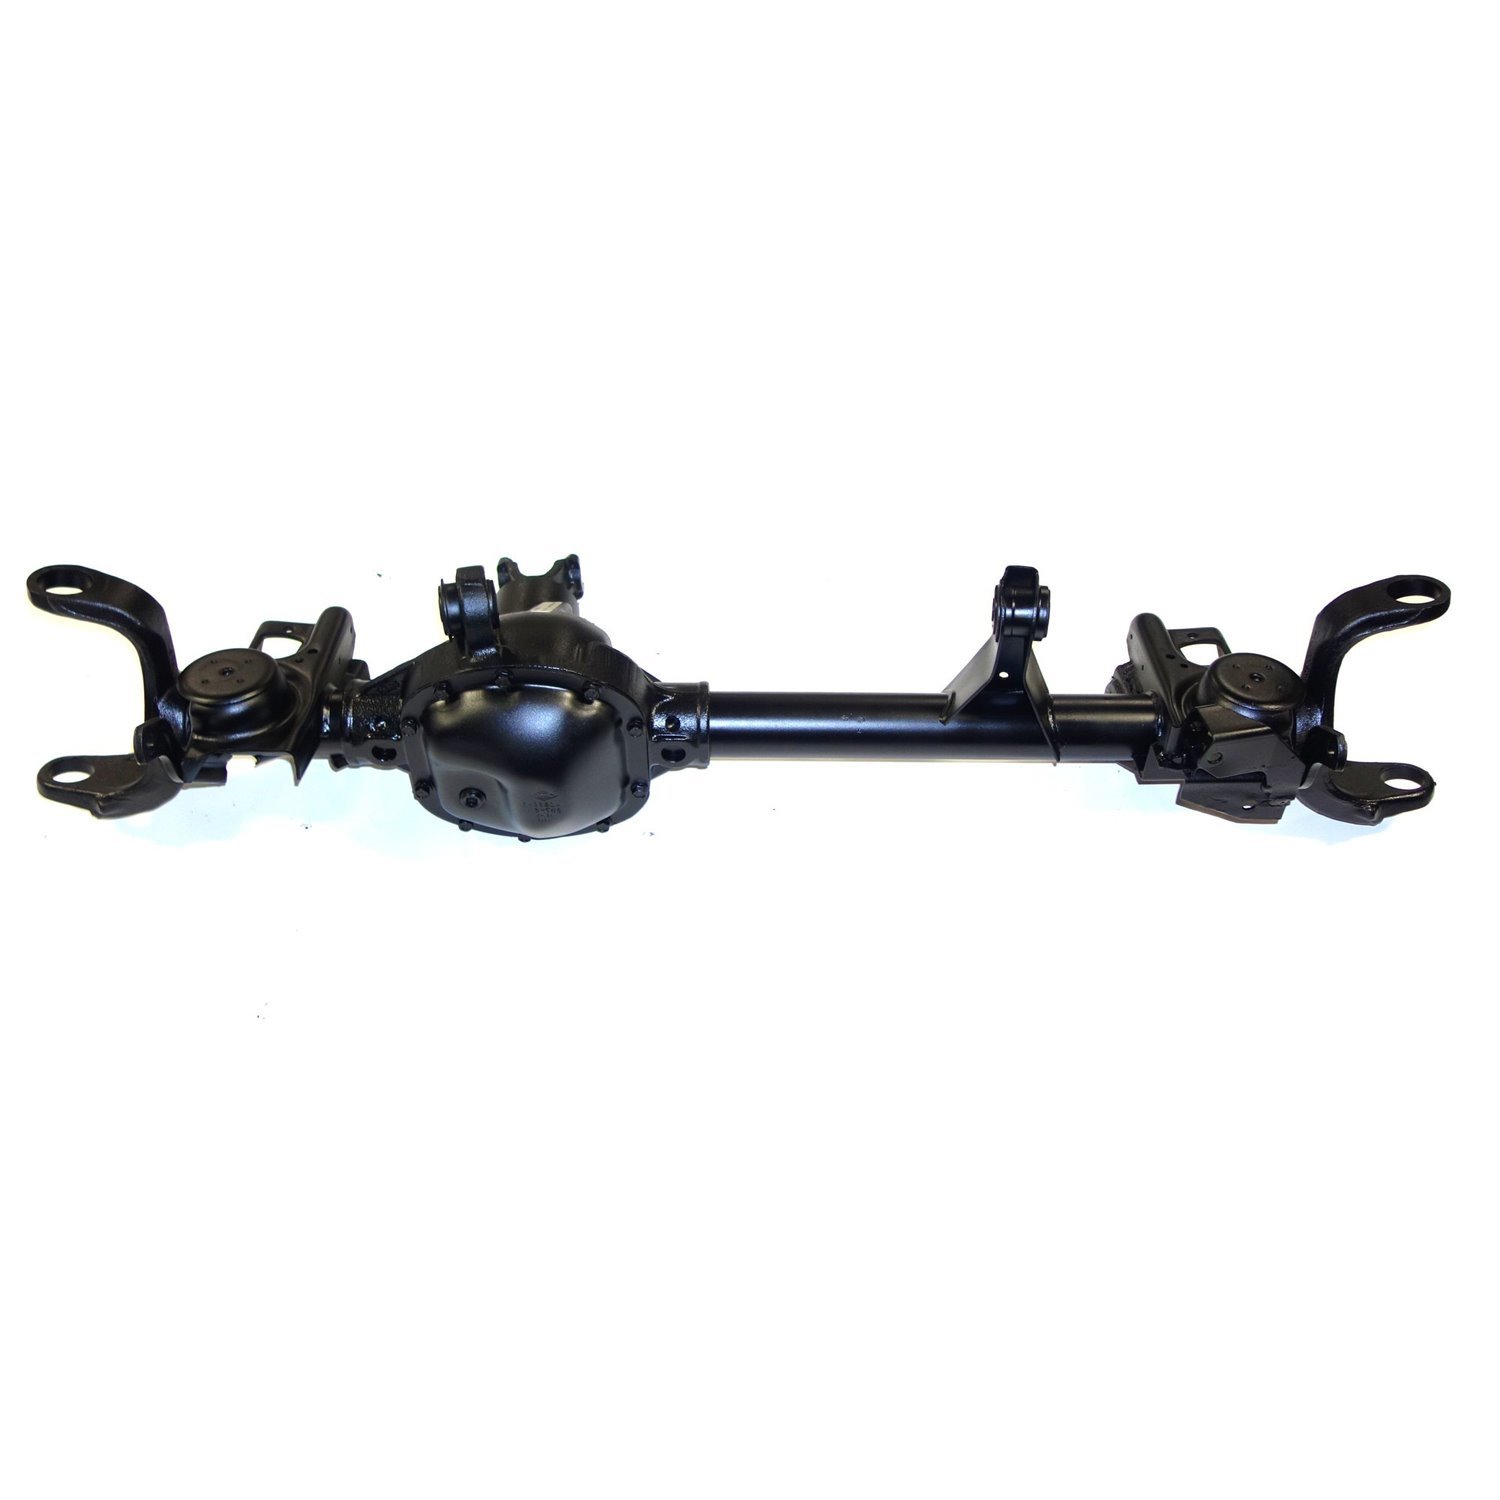 Remanufactured Complete Axle Assembly for Dana 30 2000 Jeep Grand Cherokee 3.73 Ratio